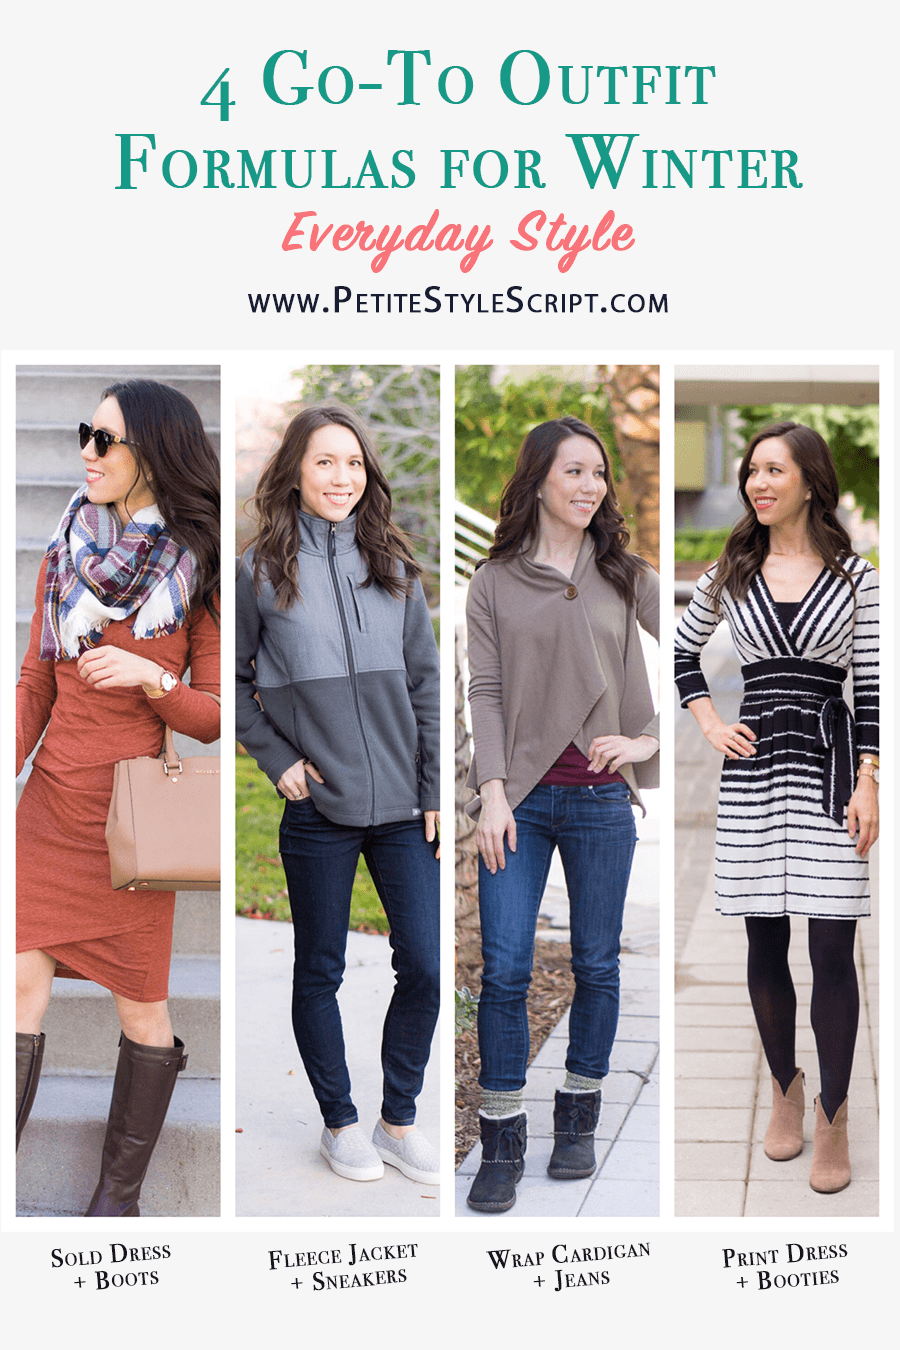 CASUAL WINTER OUTFIT FORMULAS: Tunic + Leggings + Tall Boots